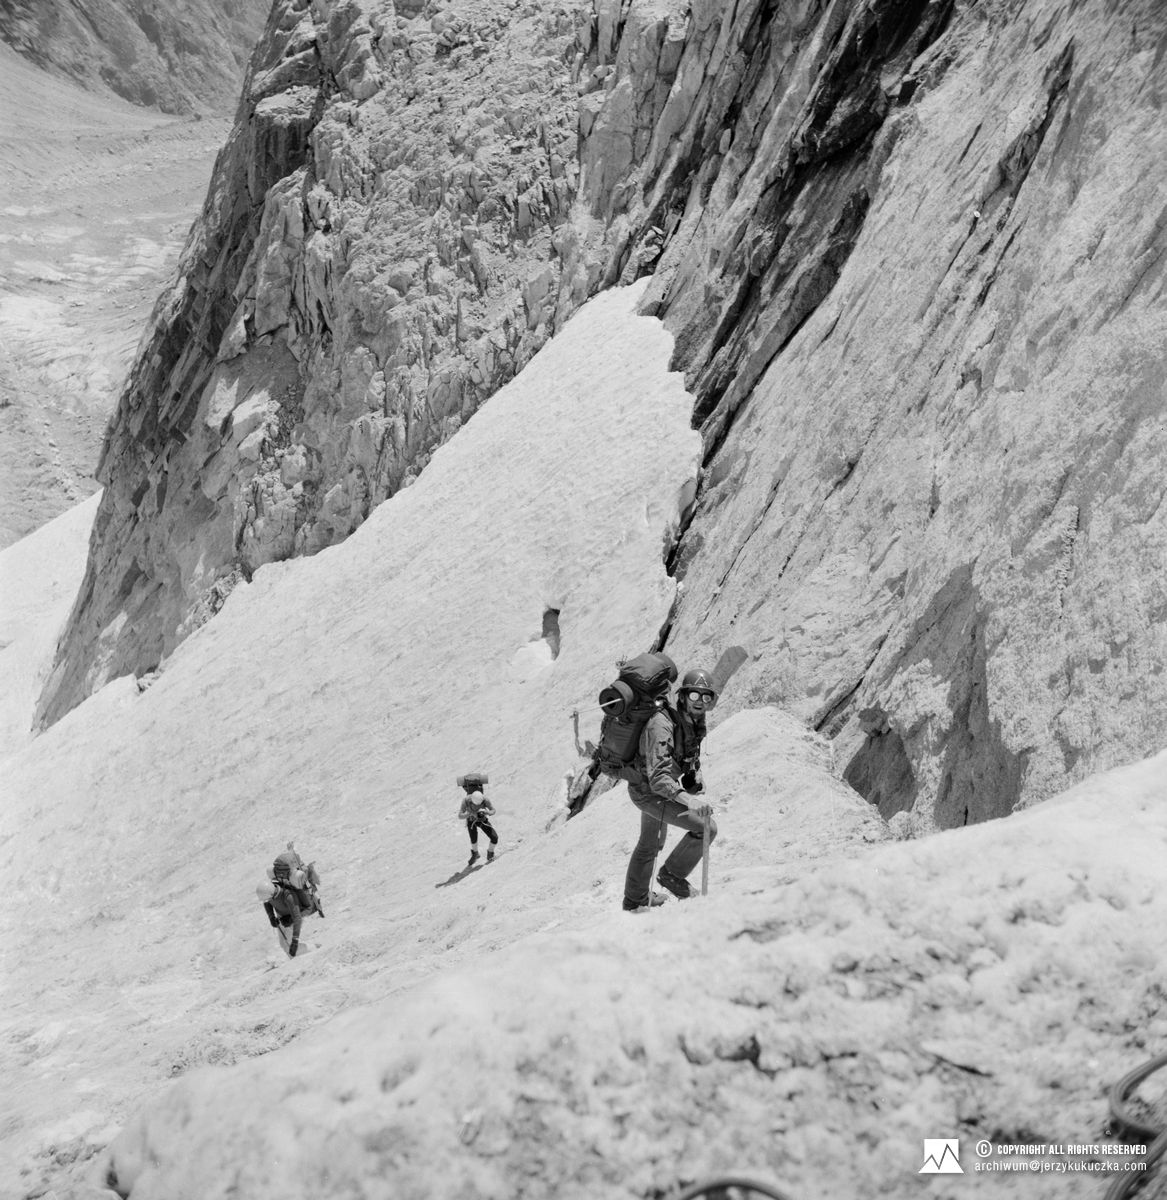 Participants of the expedition while climbing. From the right: Matjaž Veselko, Paweł Pallus and Miro Štebe.